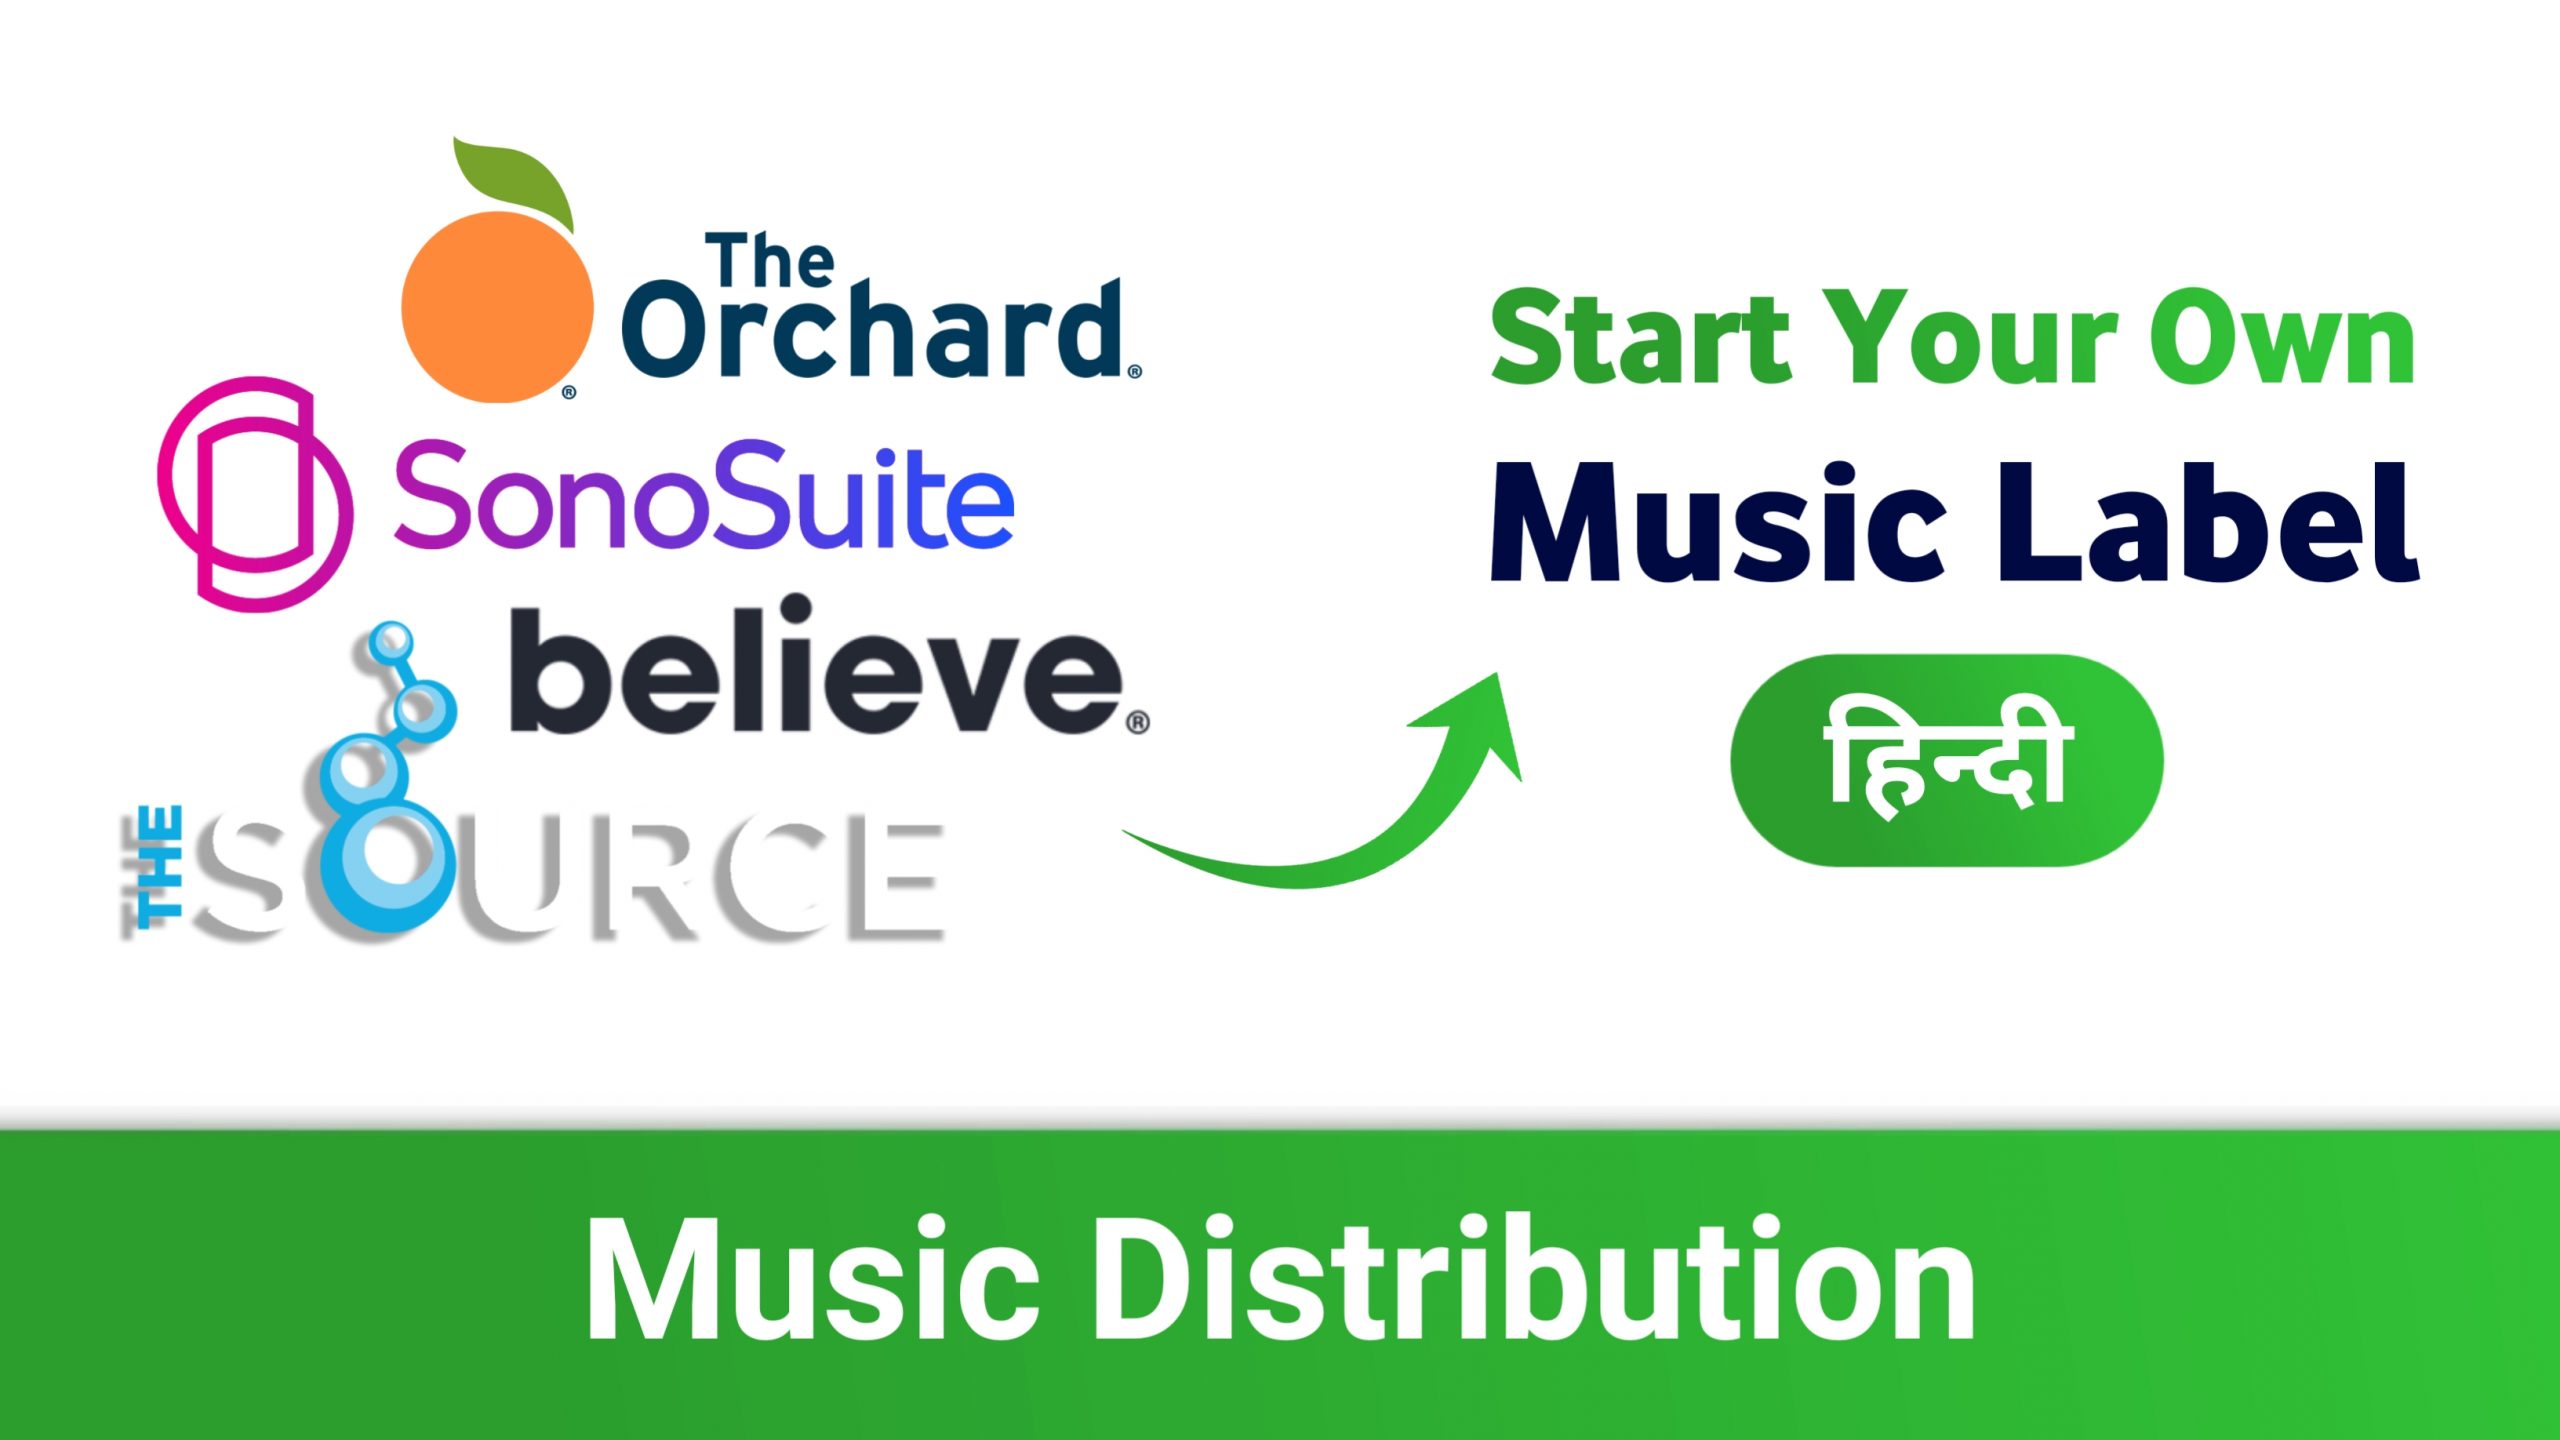 Ditto Music Tutorial: Release Your Music On 150+ Music Streaming Platforms  